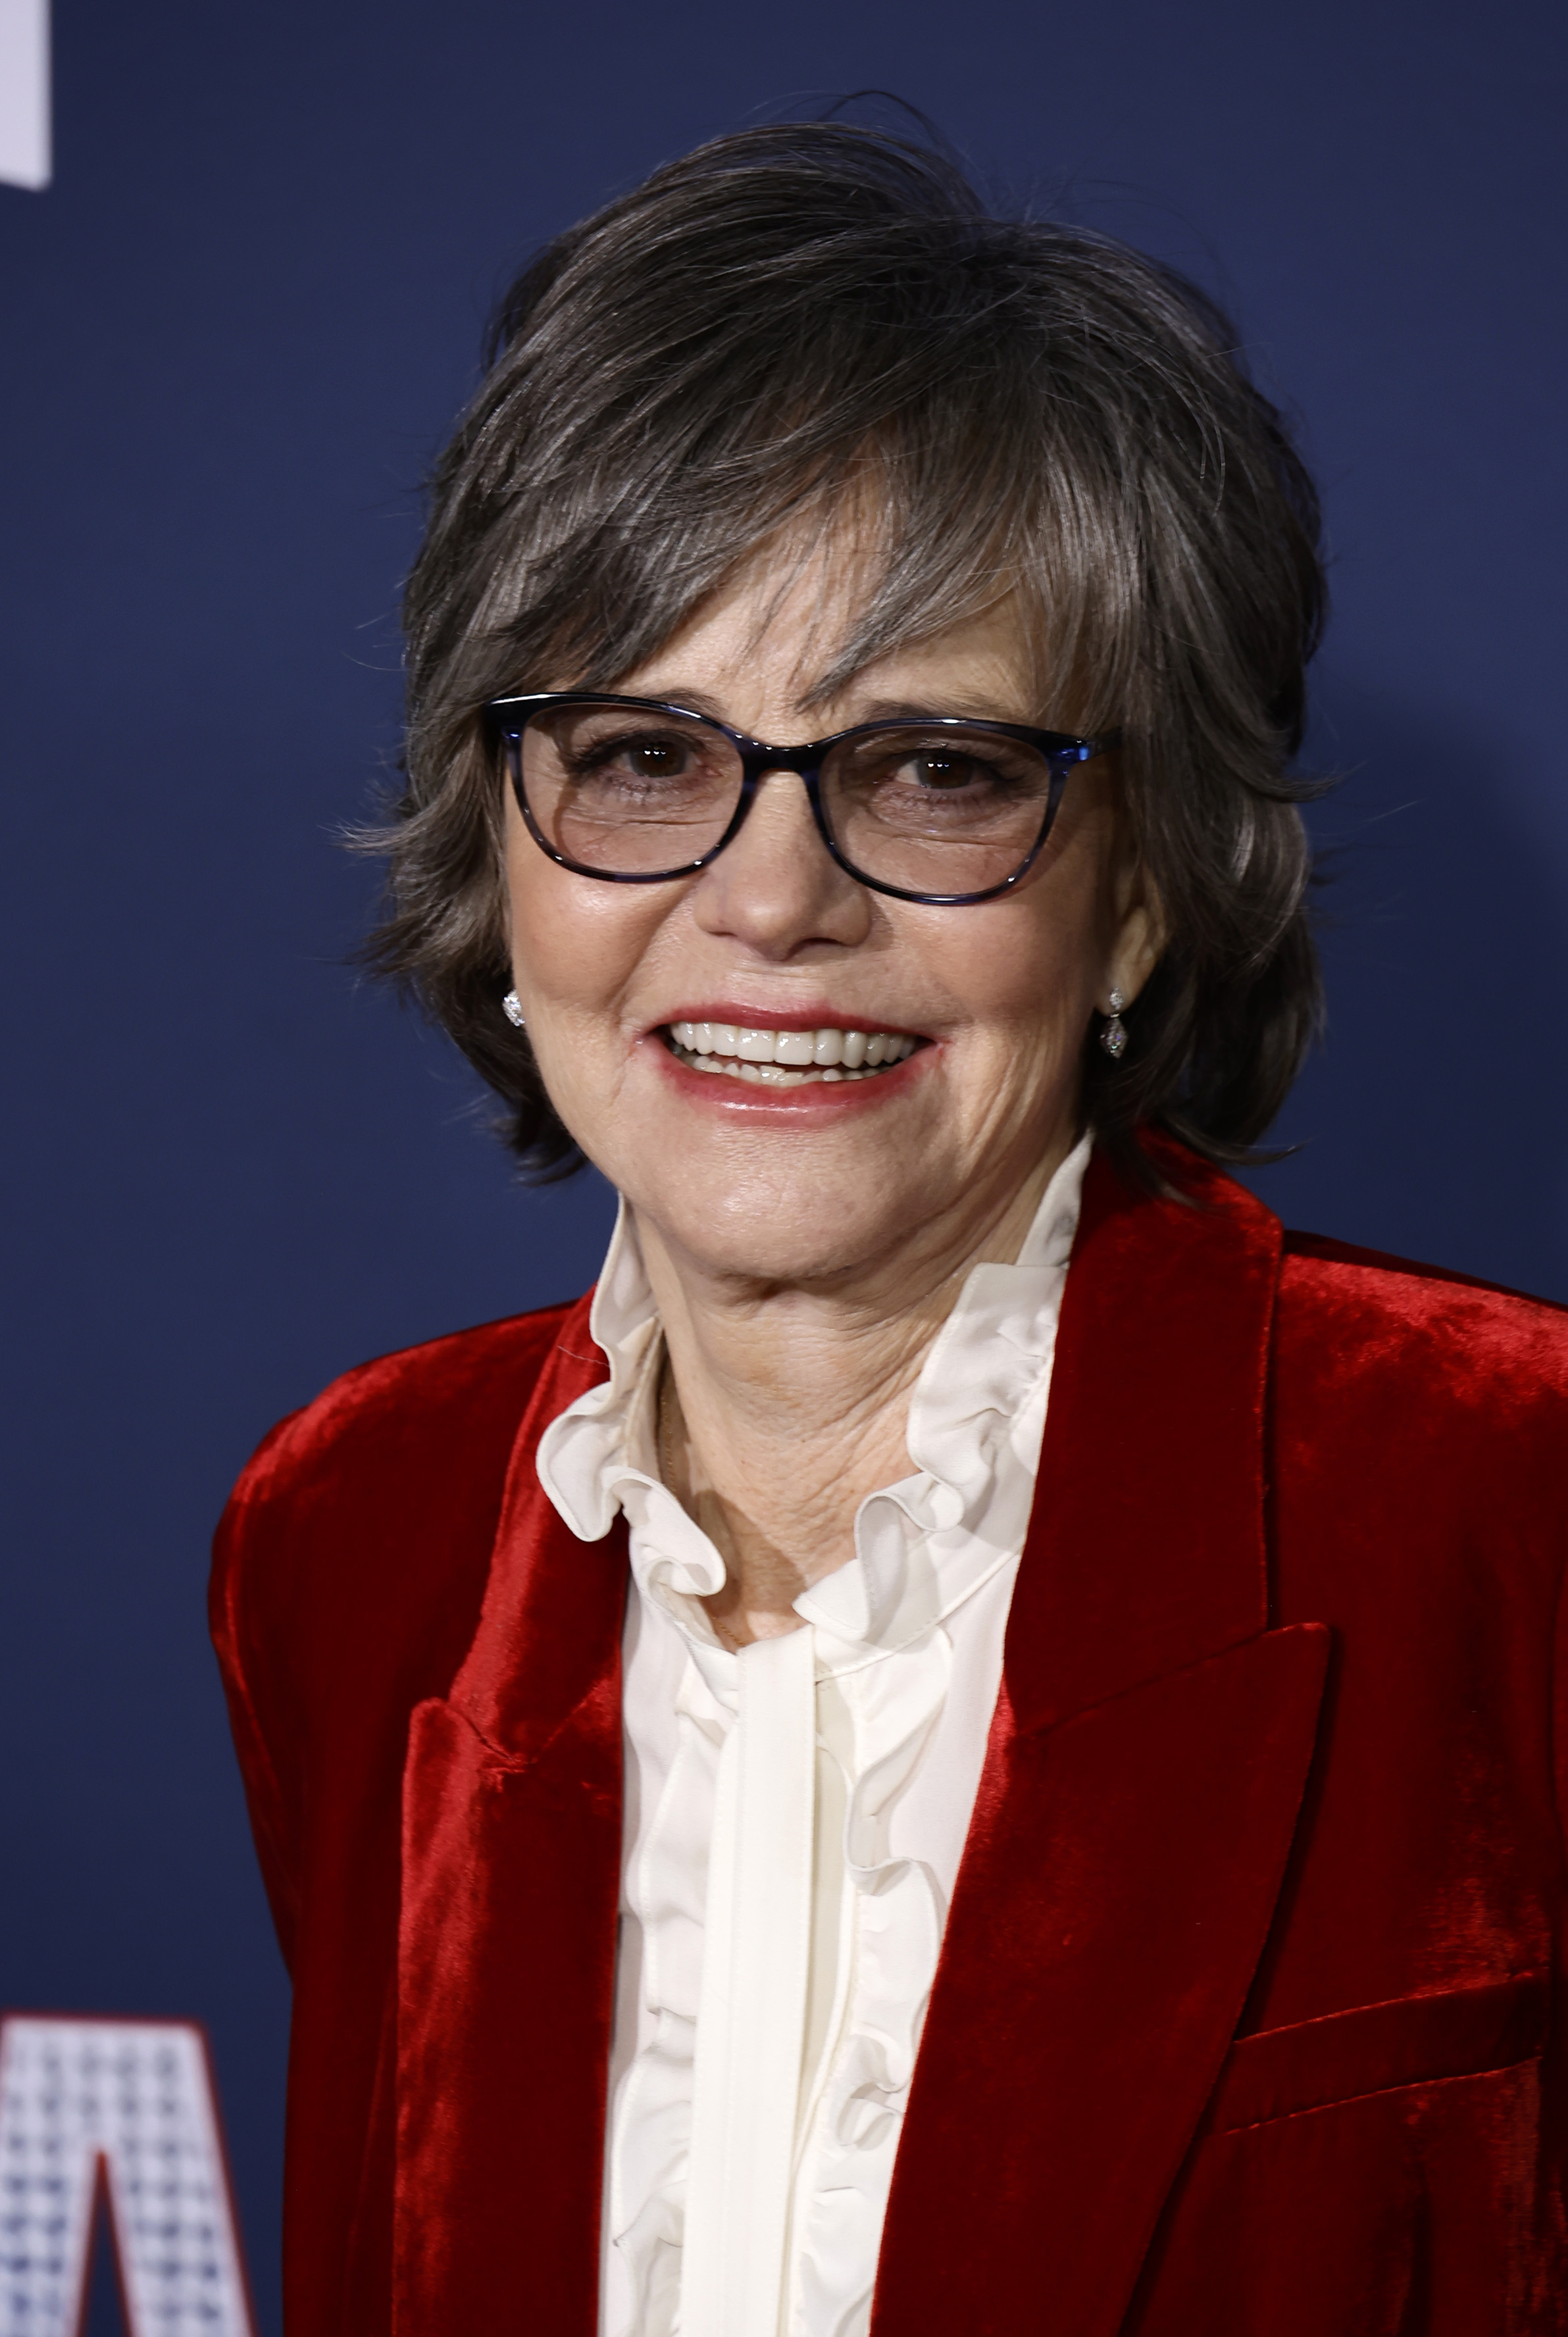 Sally Field at the "80 For Brady" premiere screening in Los Angeles, 2023 | Source: Getty Images